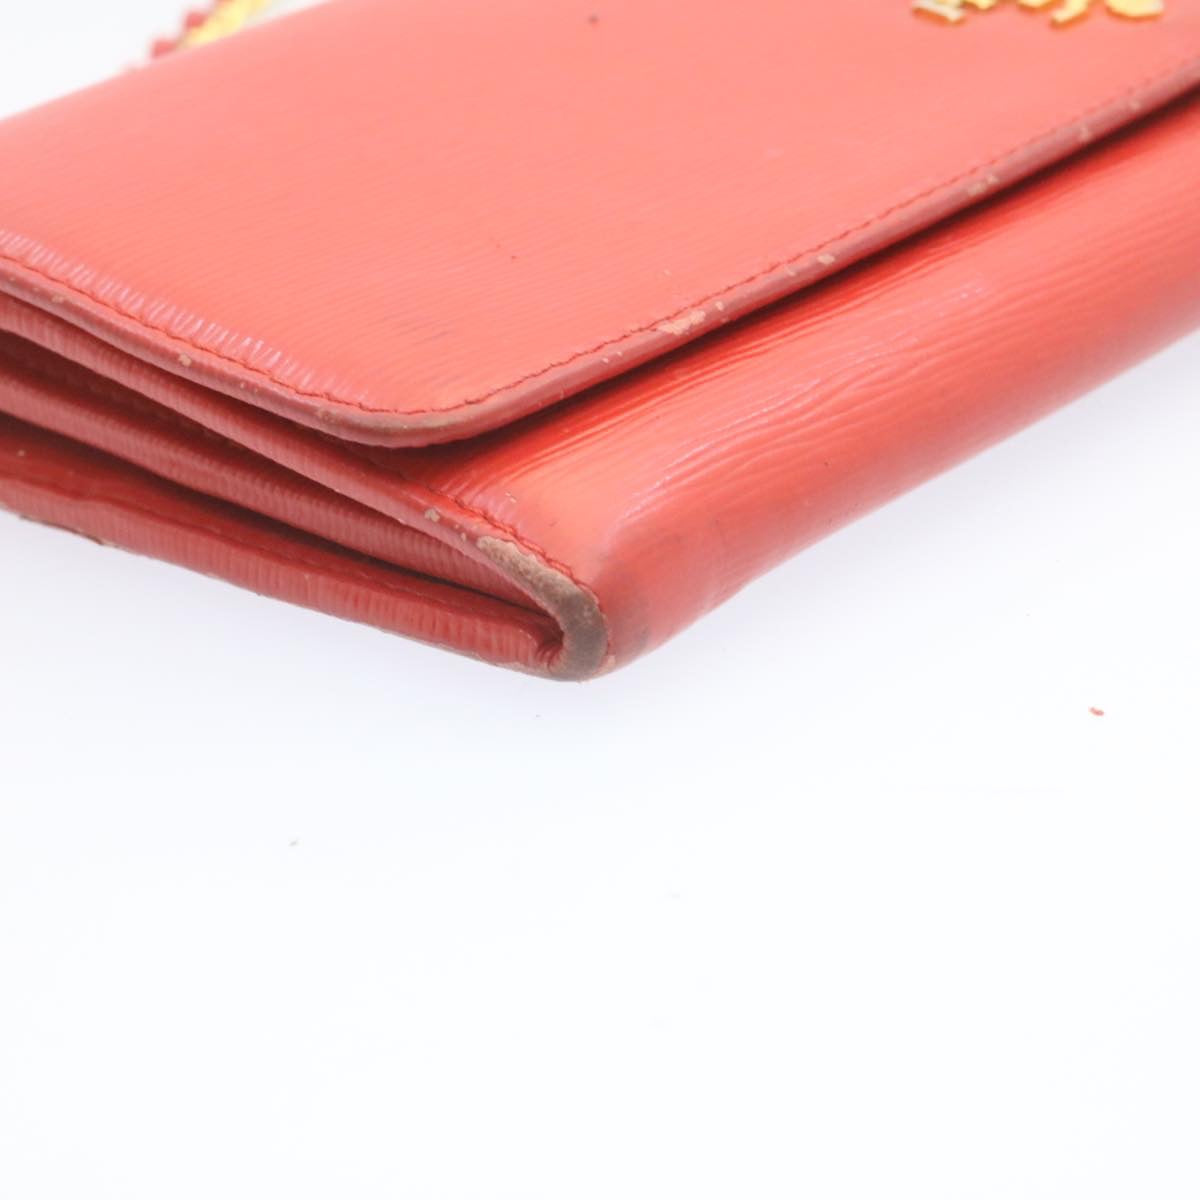 PRADA Chain Shoulder Long Wallet Leather Red Gold Auth ar5709